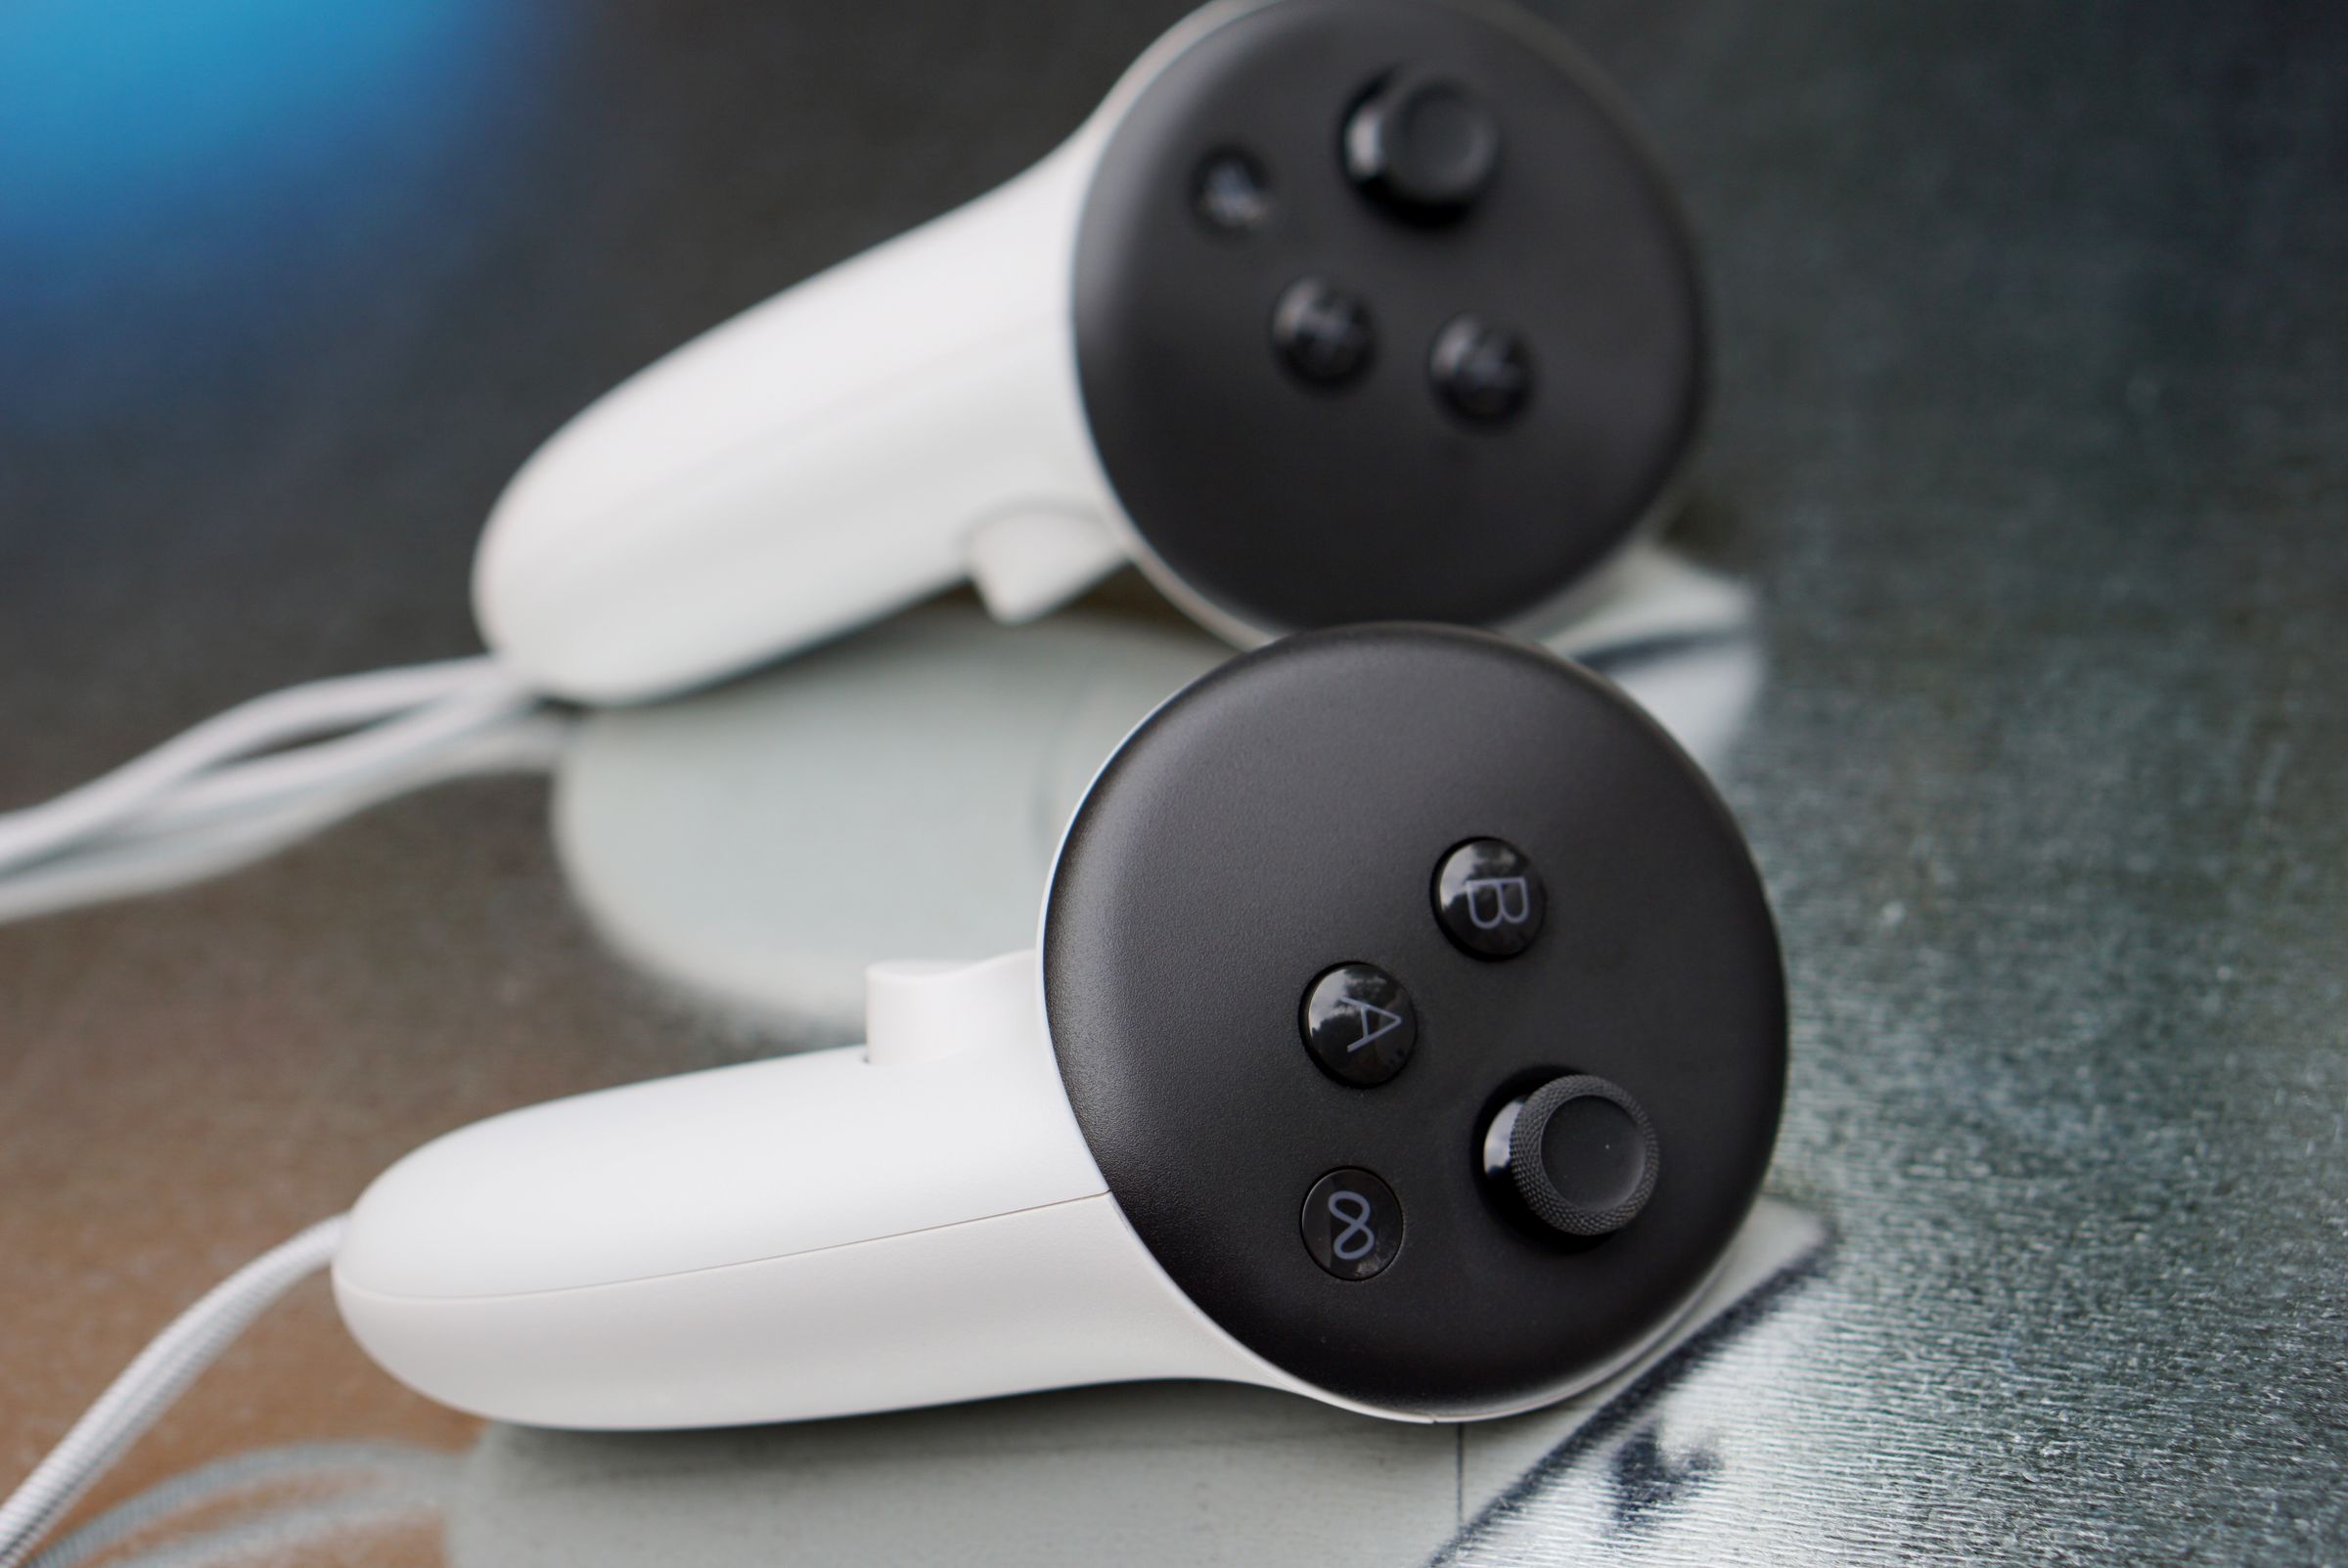 A photo of two white controllers on a shiny metal background.